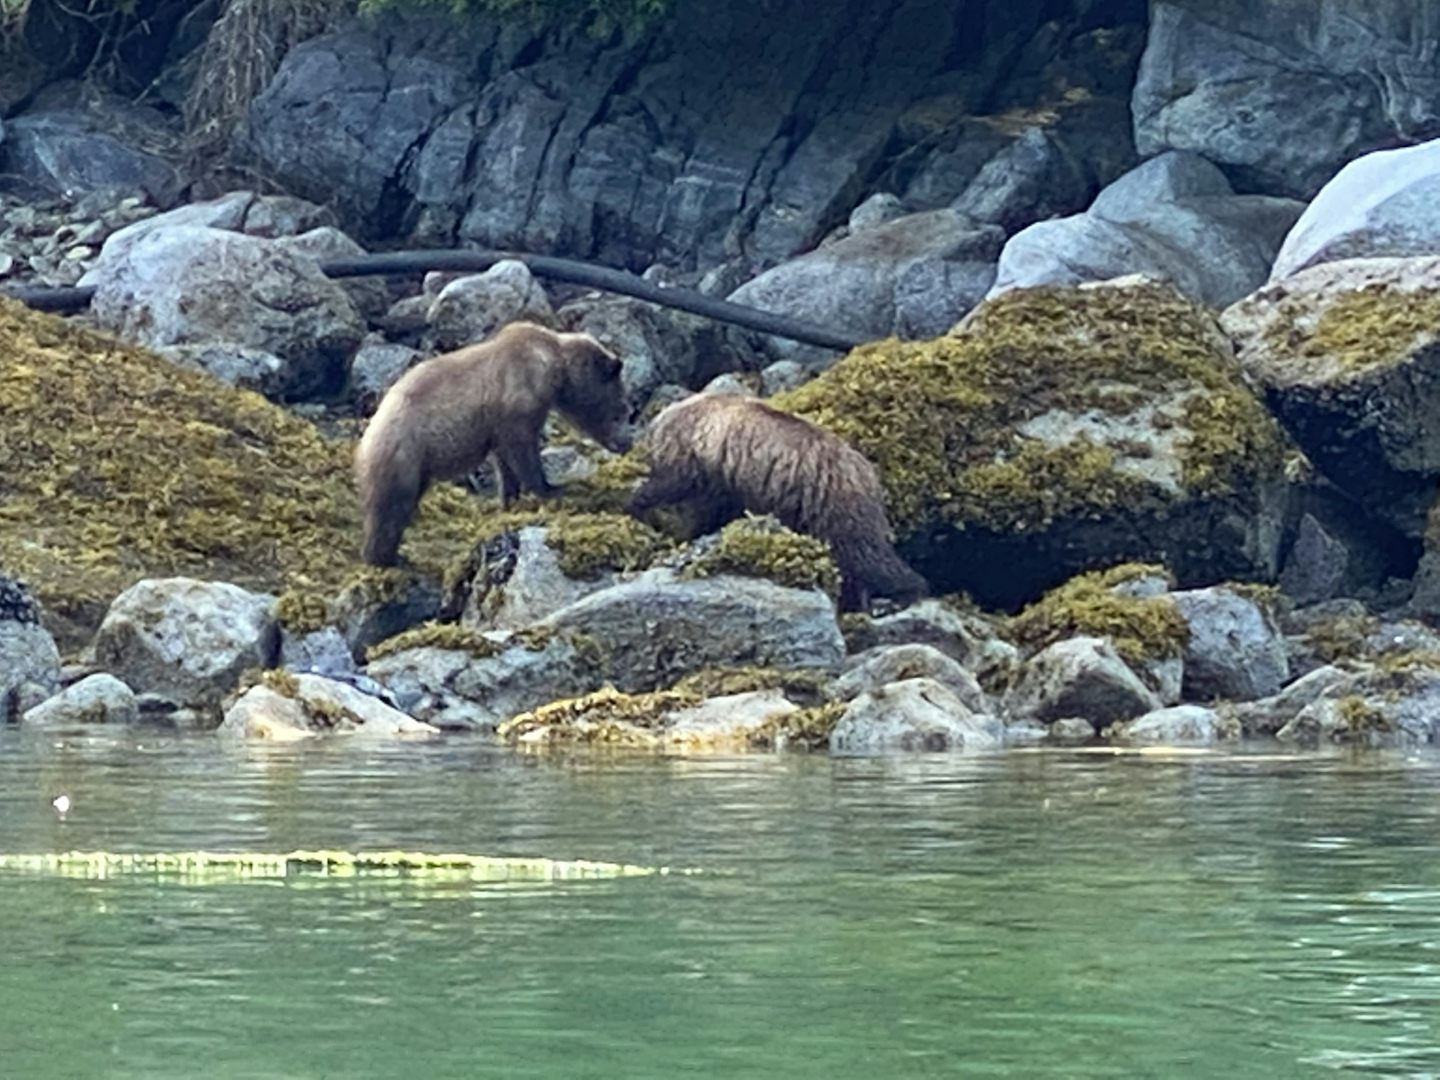 2bears (hopefully siblings) meeting at the shoreline before catching salmon.